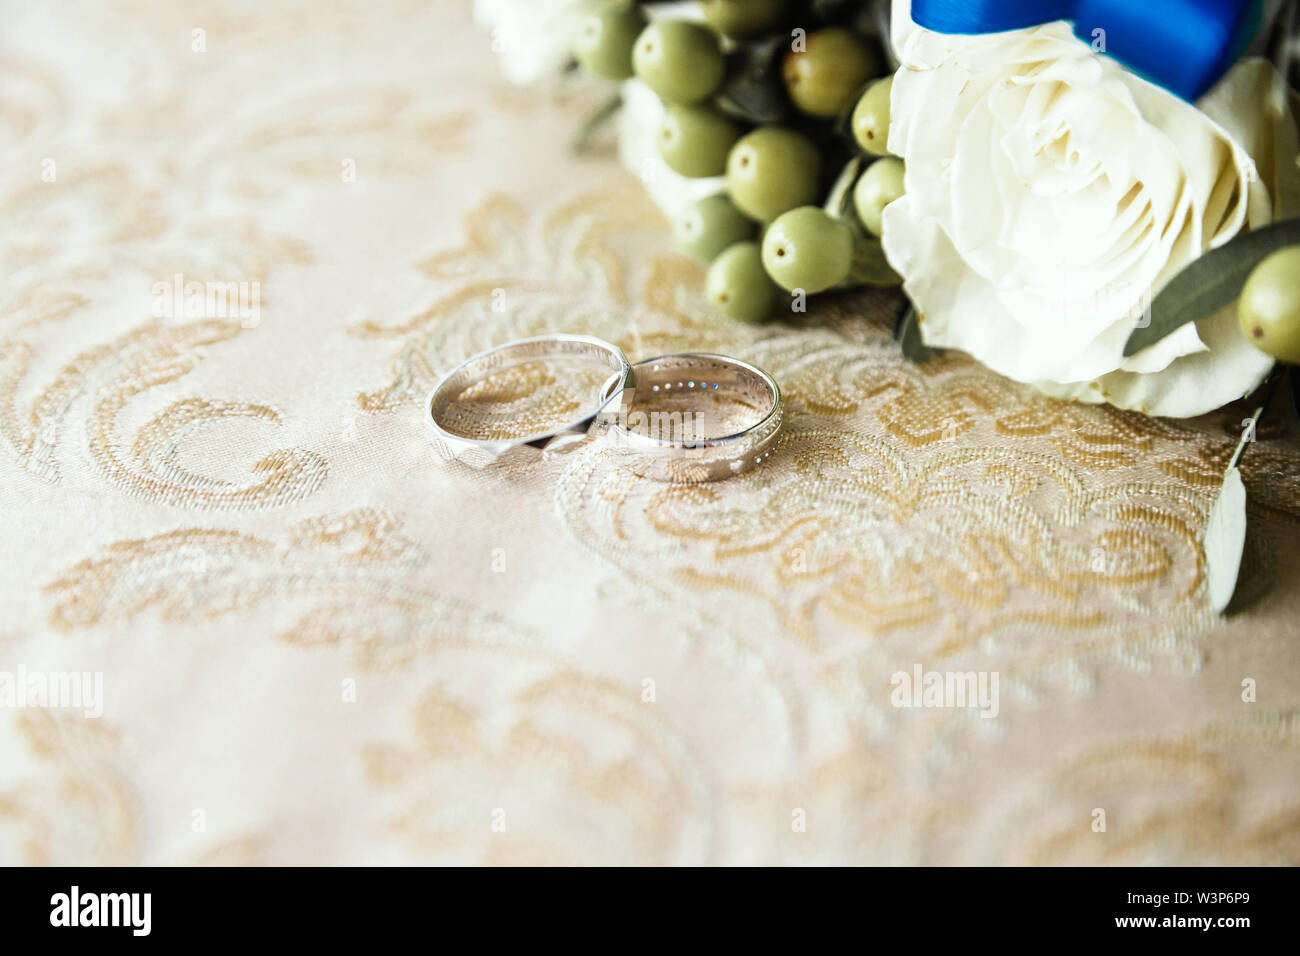 wedding rings lie on the fabric next to a bunch of flowers Stock Photo